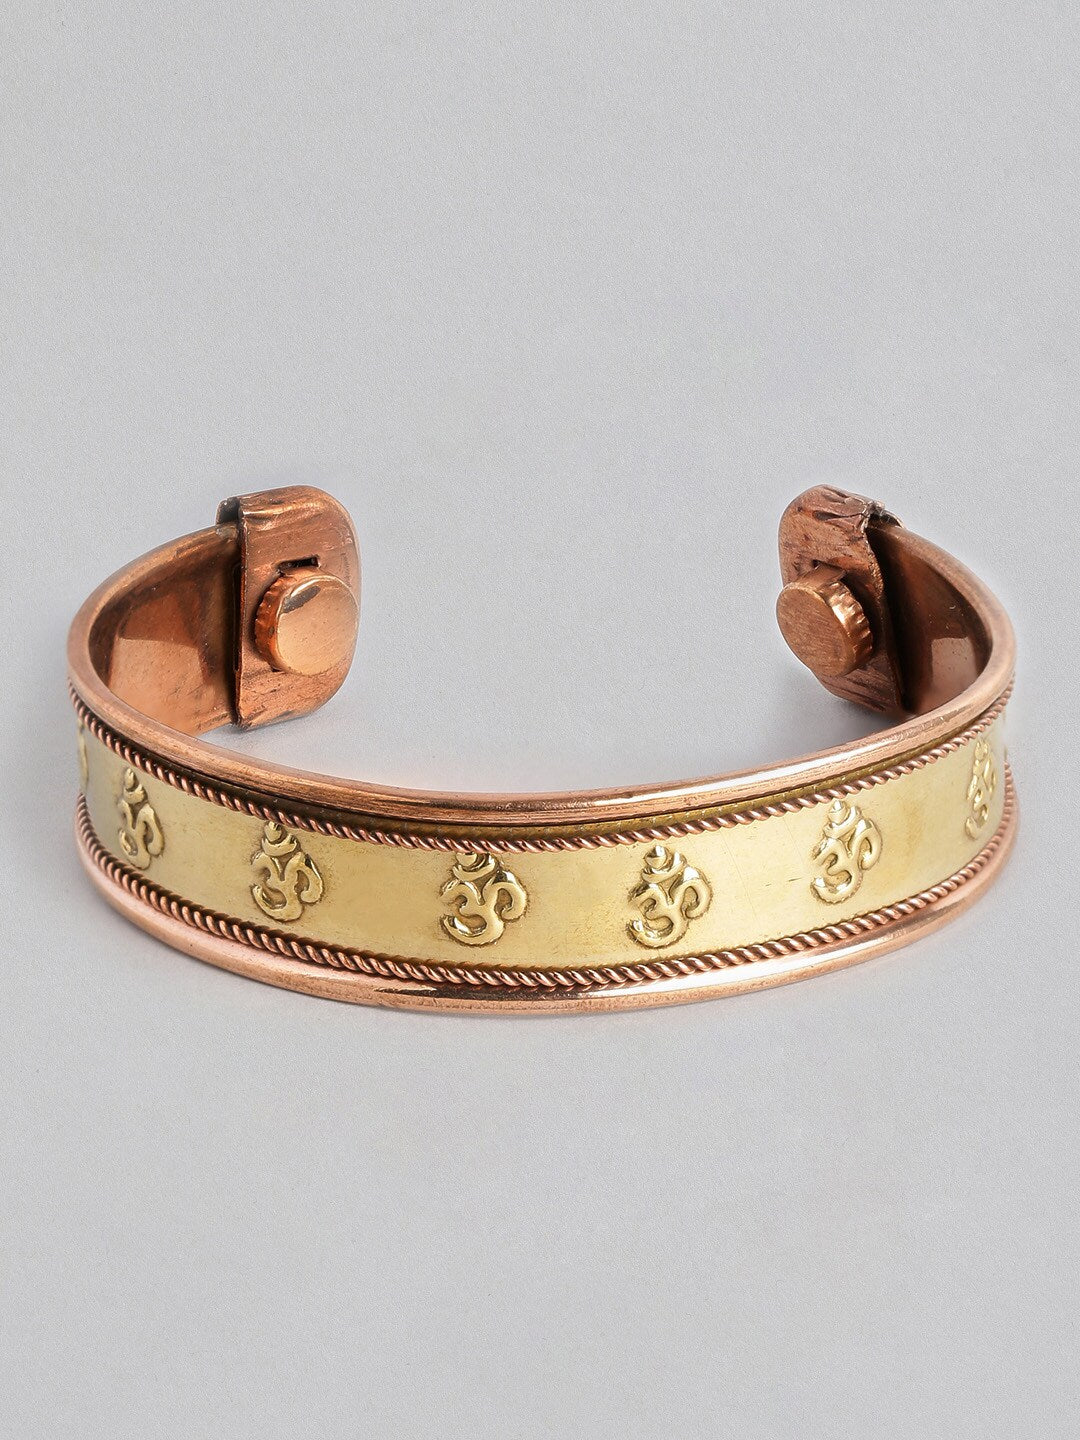 EL REGALO Men Copper-Toned & Gold-Toned Brass Handcrafted Brass-Plated Cuff Bracelet - for Men
Style ID: 15980614